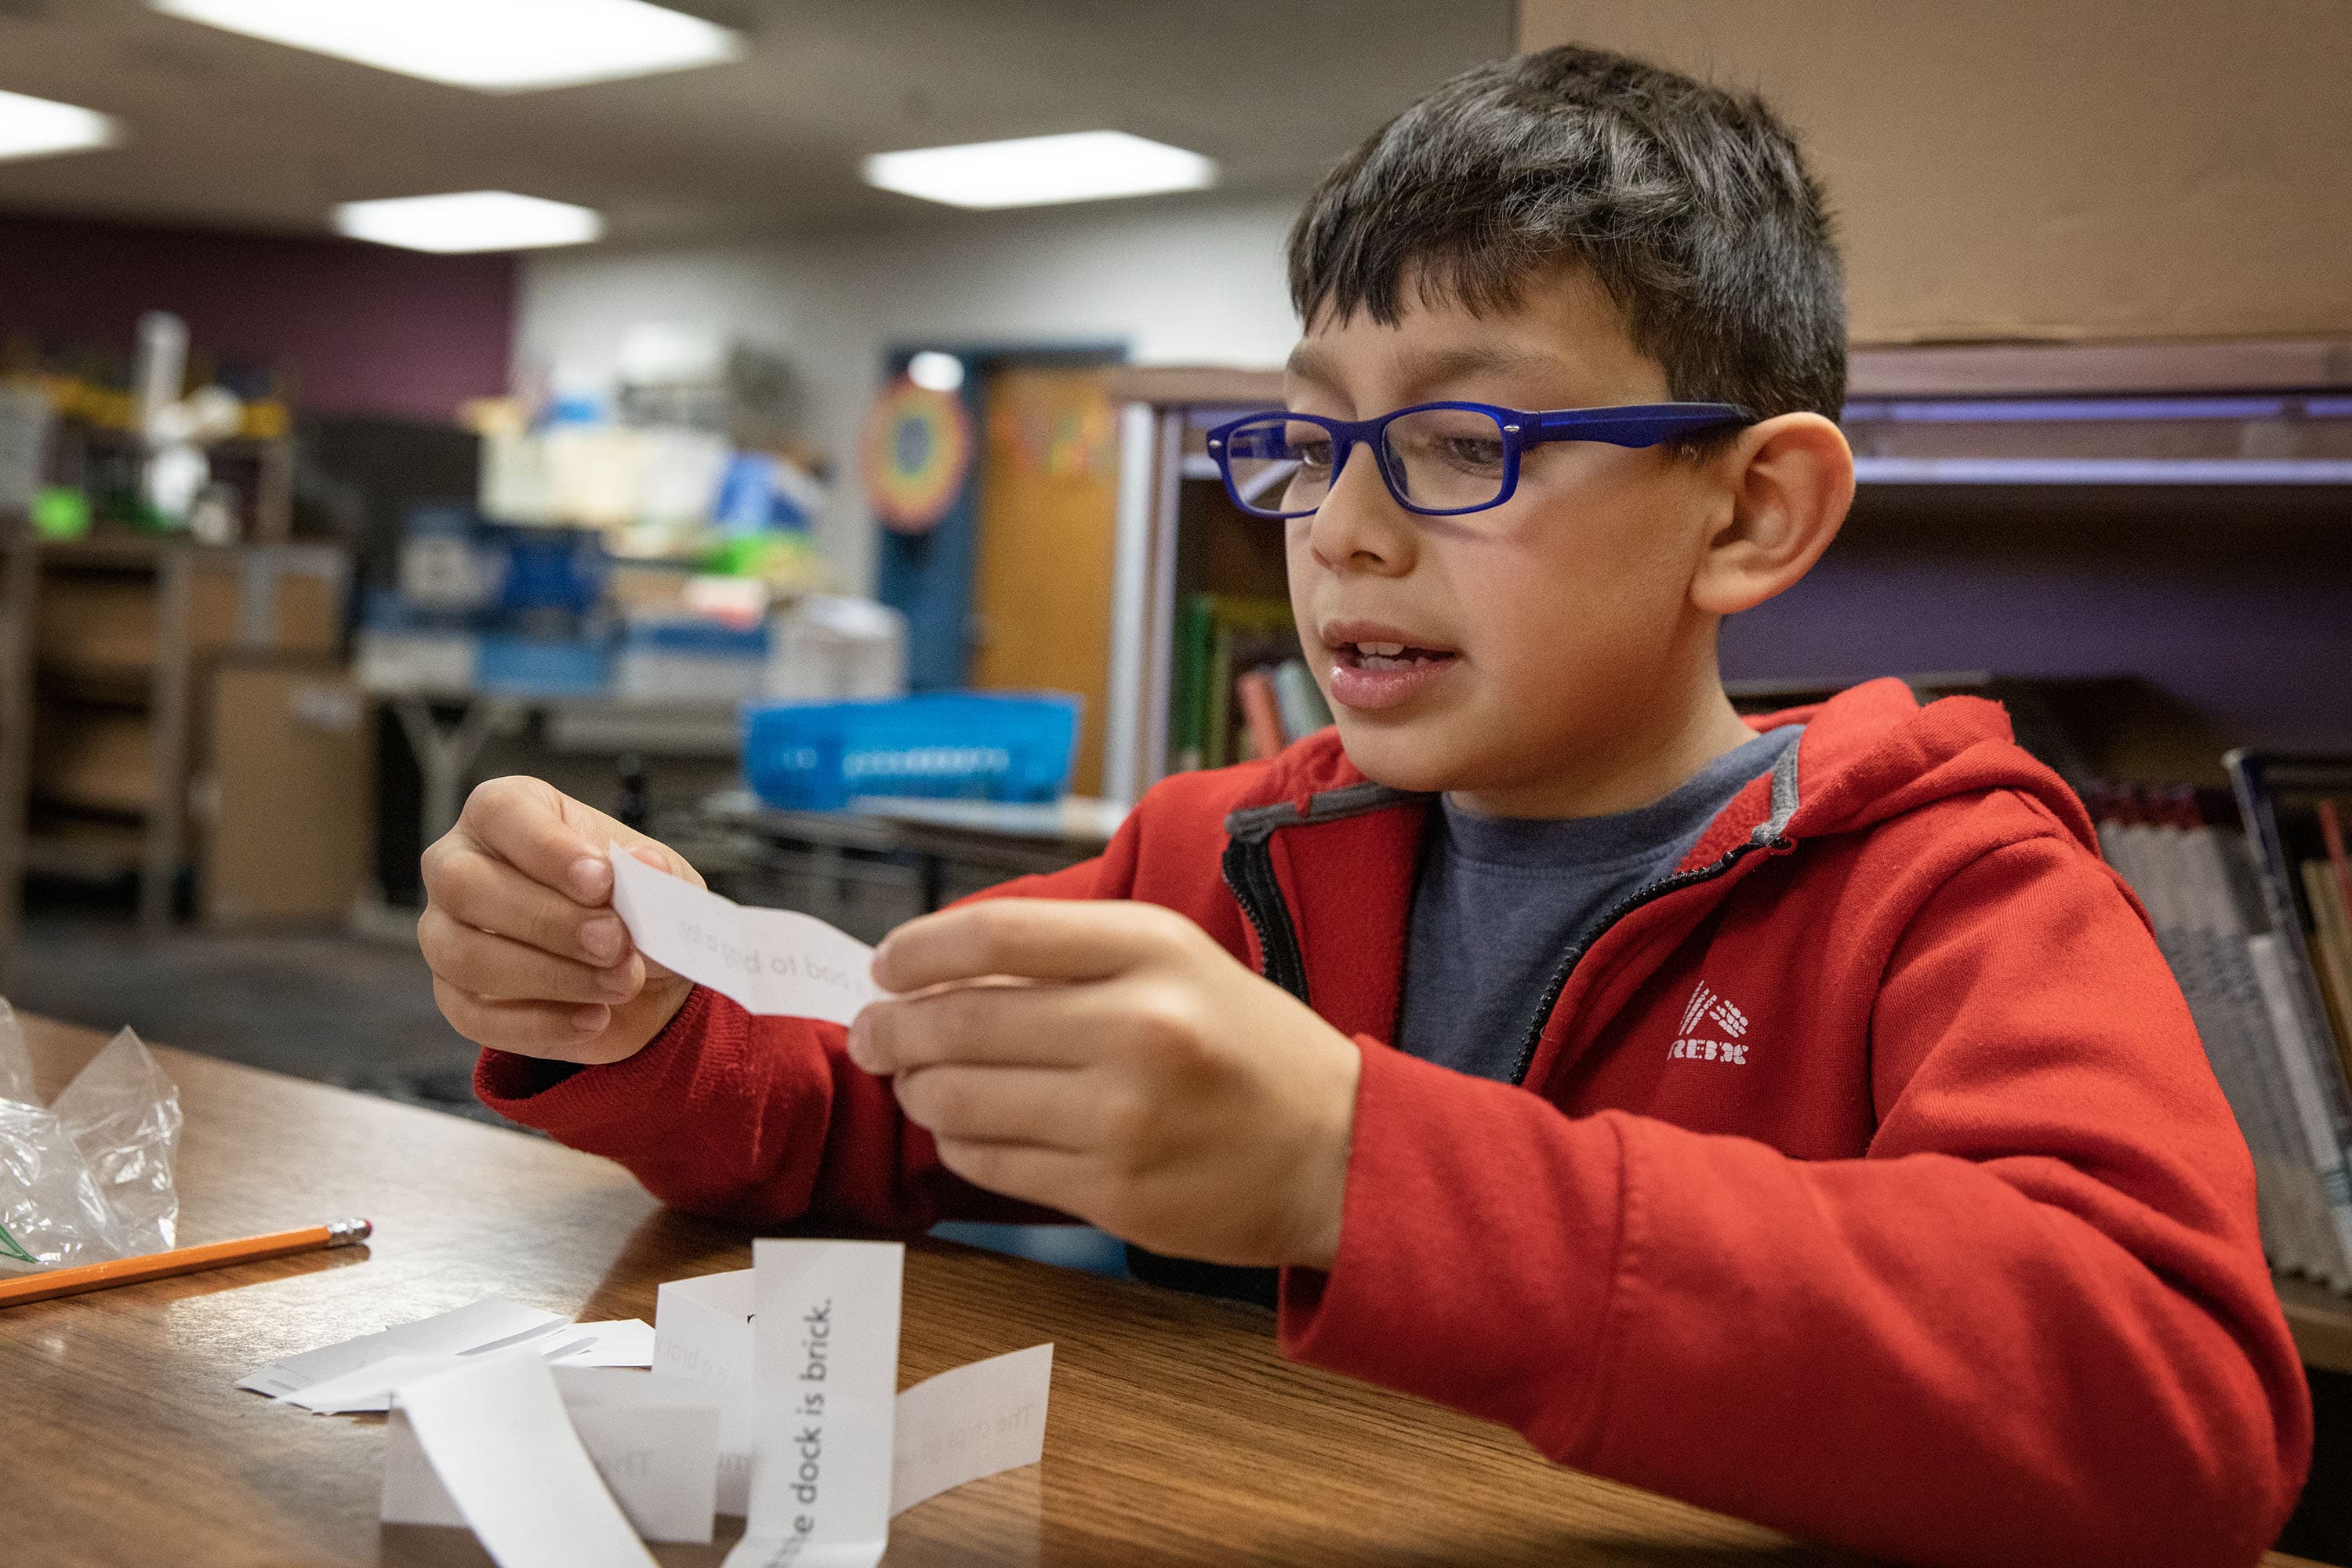 Third grader Matthew Pacheco Hernandez in Audra Lessard's small group reads sentences from strips of paper as quickly as he can. (Robin Lubbock/WBUR)